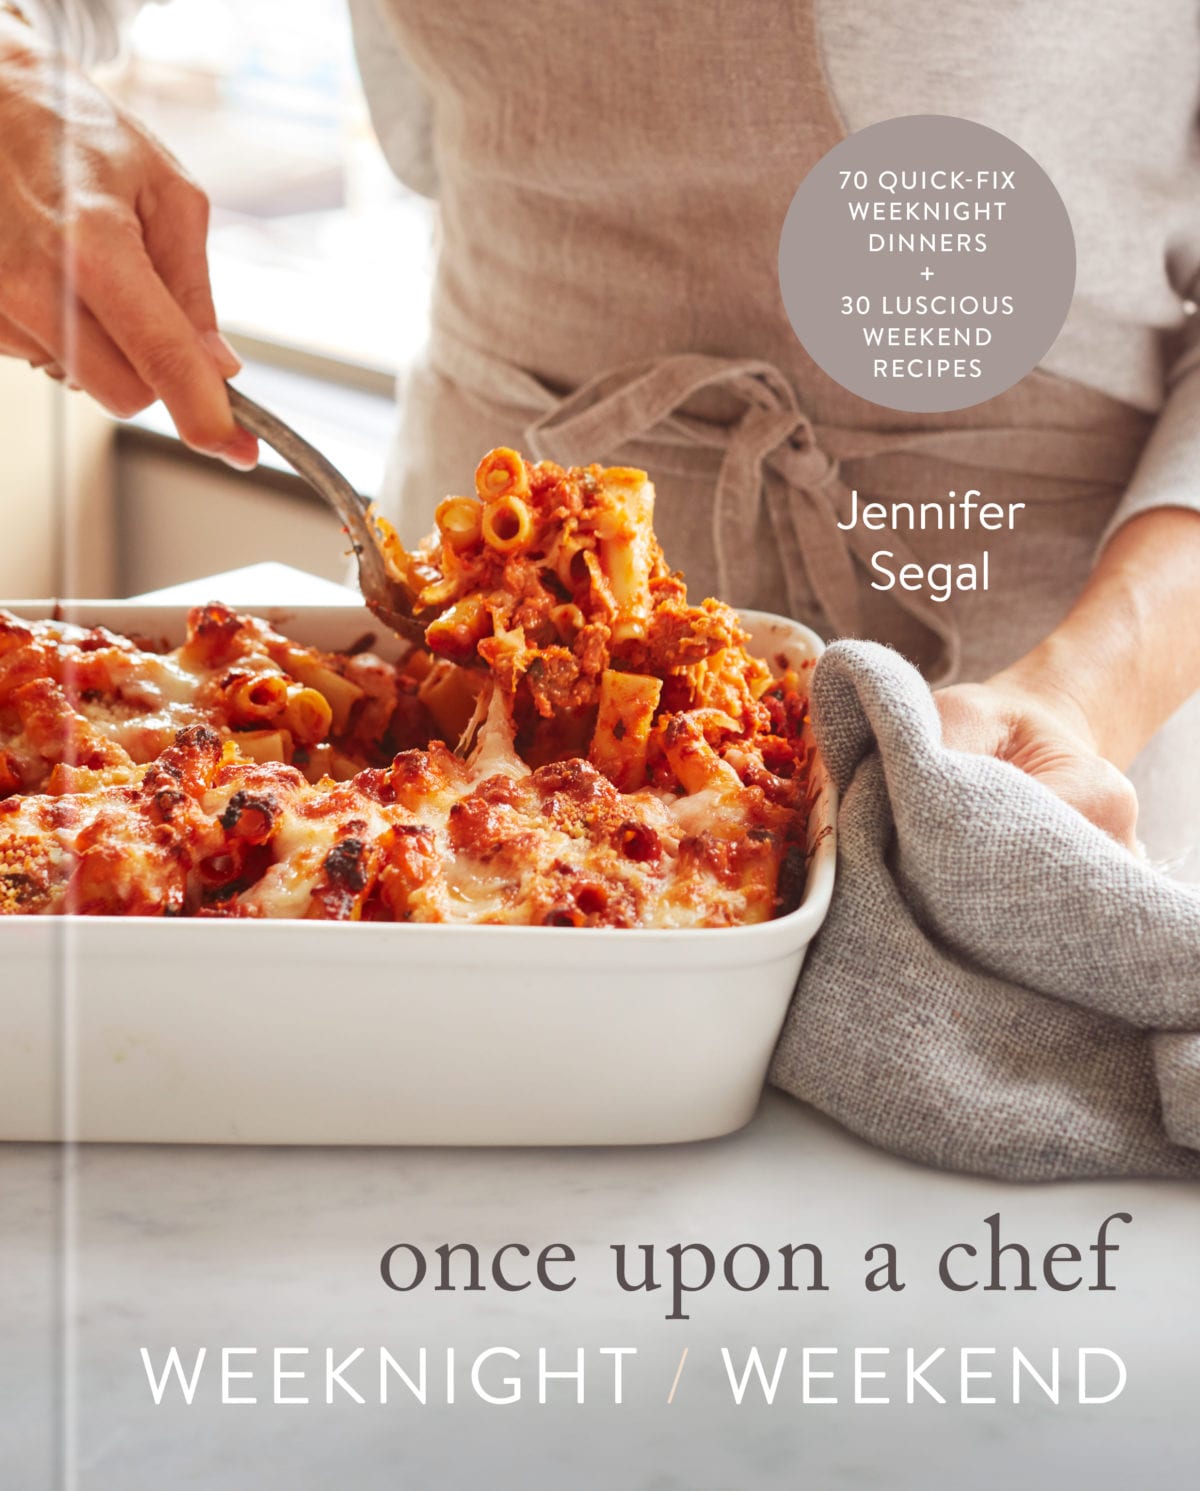 https://www.onceuponachef.com/images/2021/04/weeknight-weekend-cookbook-cover-once-upon-a-chef-1200x1491.jpg